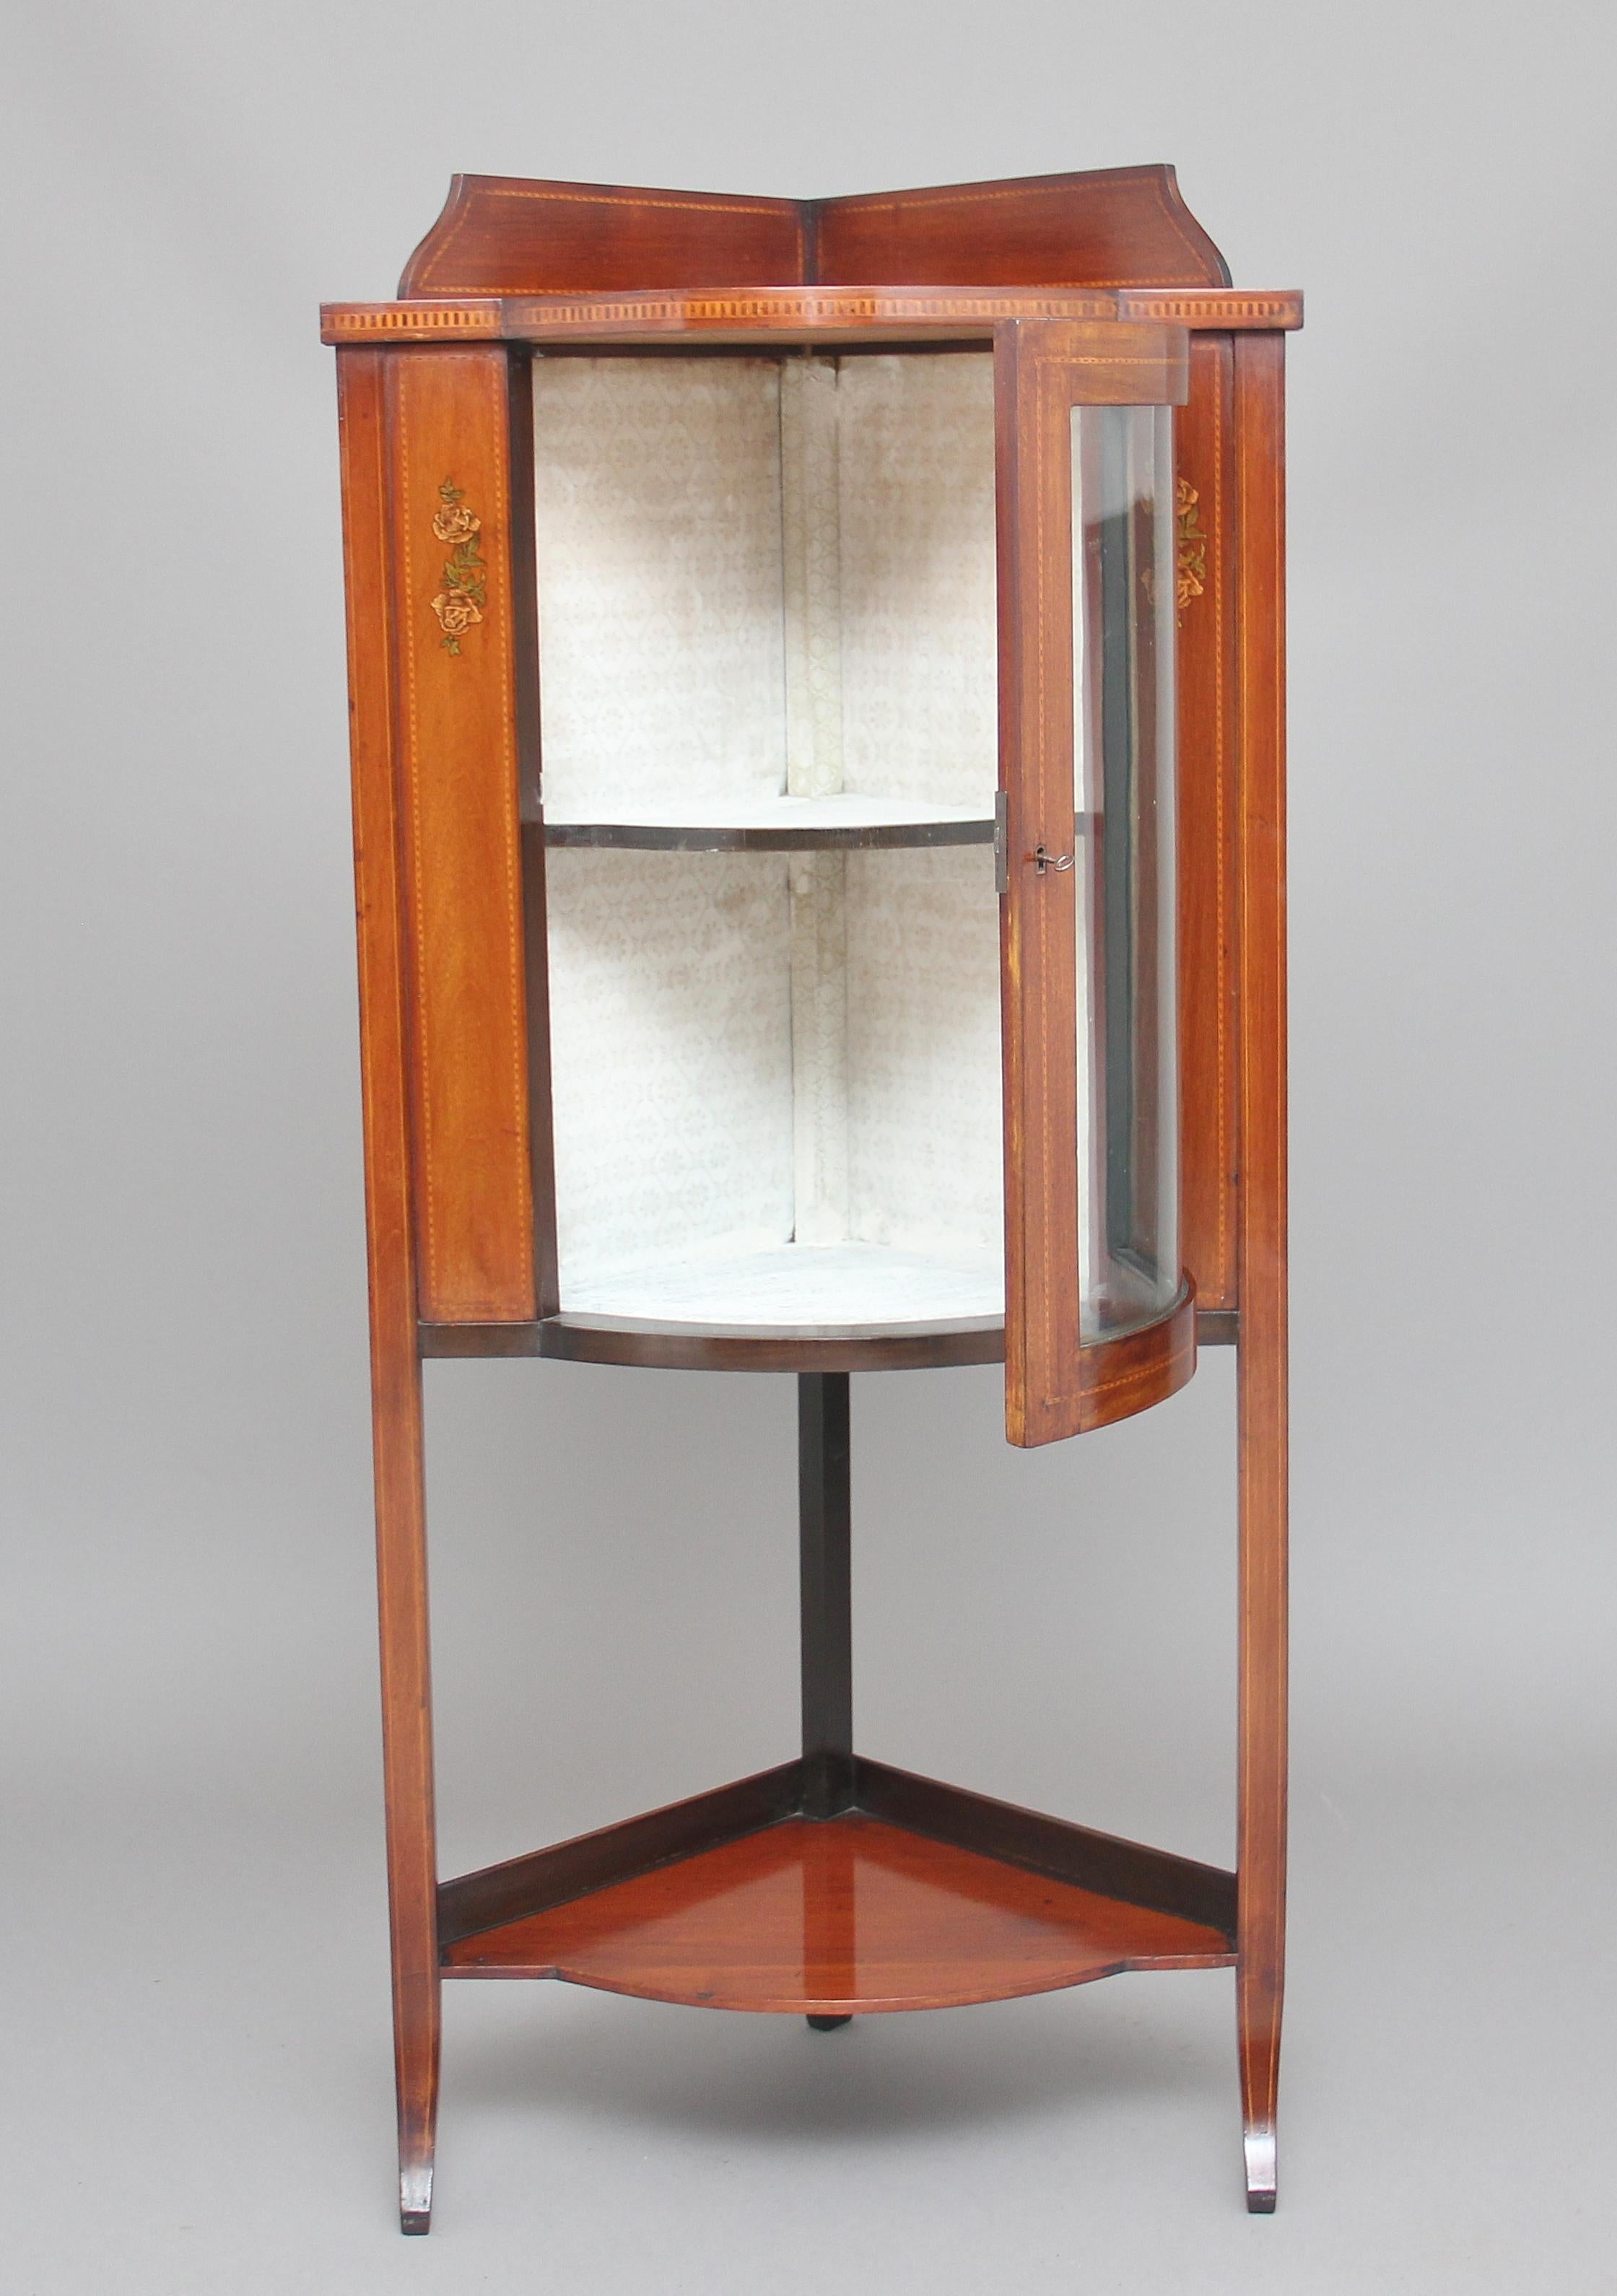 Early 19th century mahogany corner cupboard with a glazed bowfront door with a galleried shelf below and a gallery at the top, inlaid all-over with black and while line and painted floral decoration either side of the door, circa 1910.